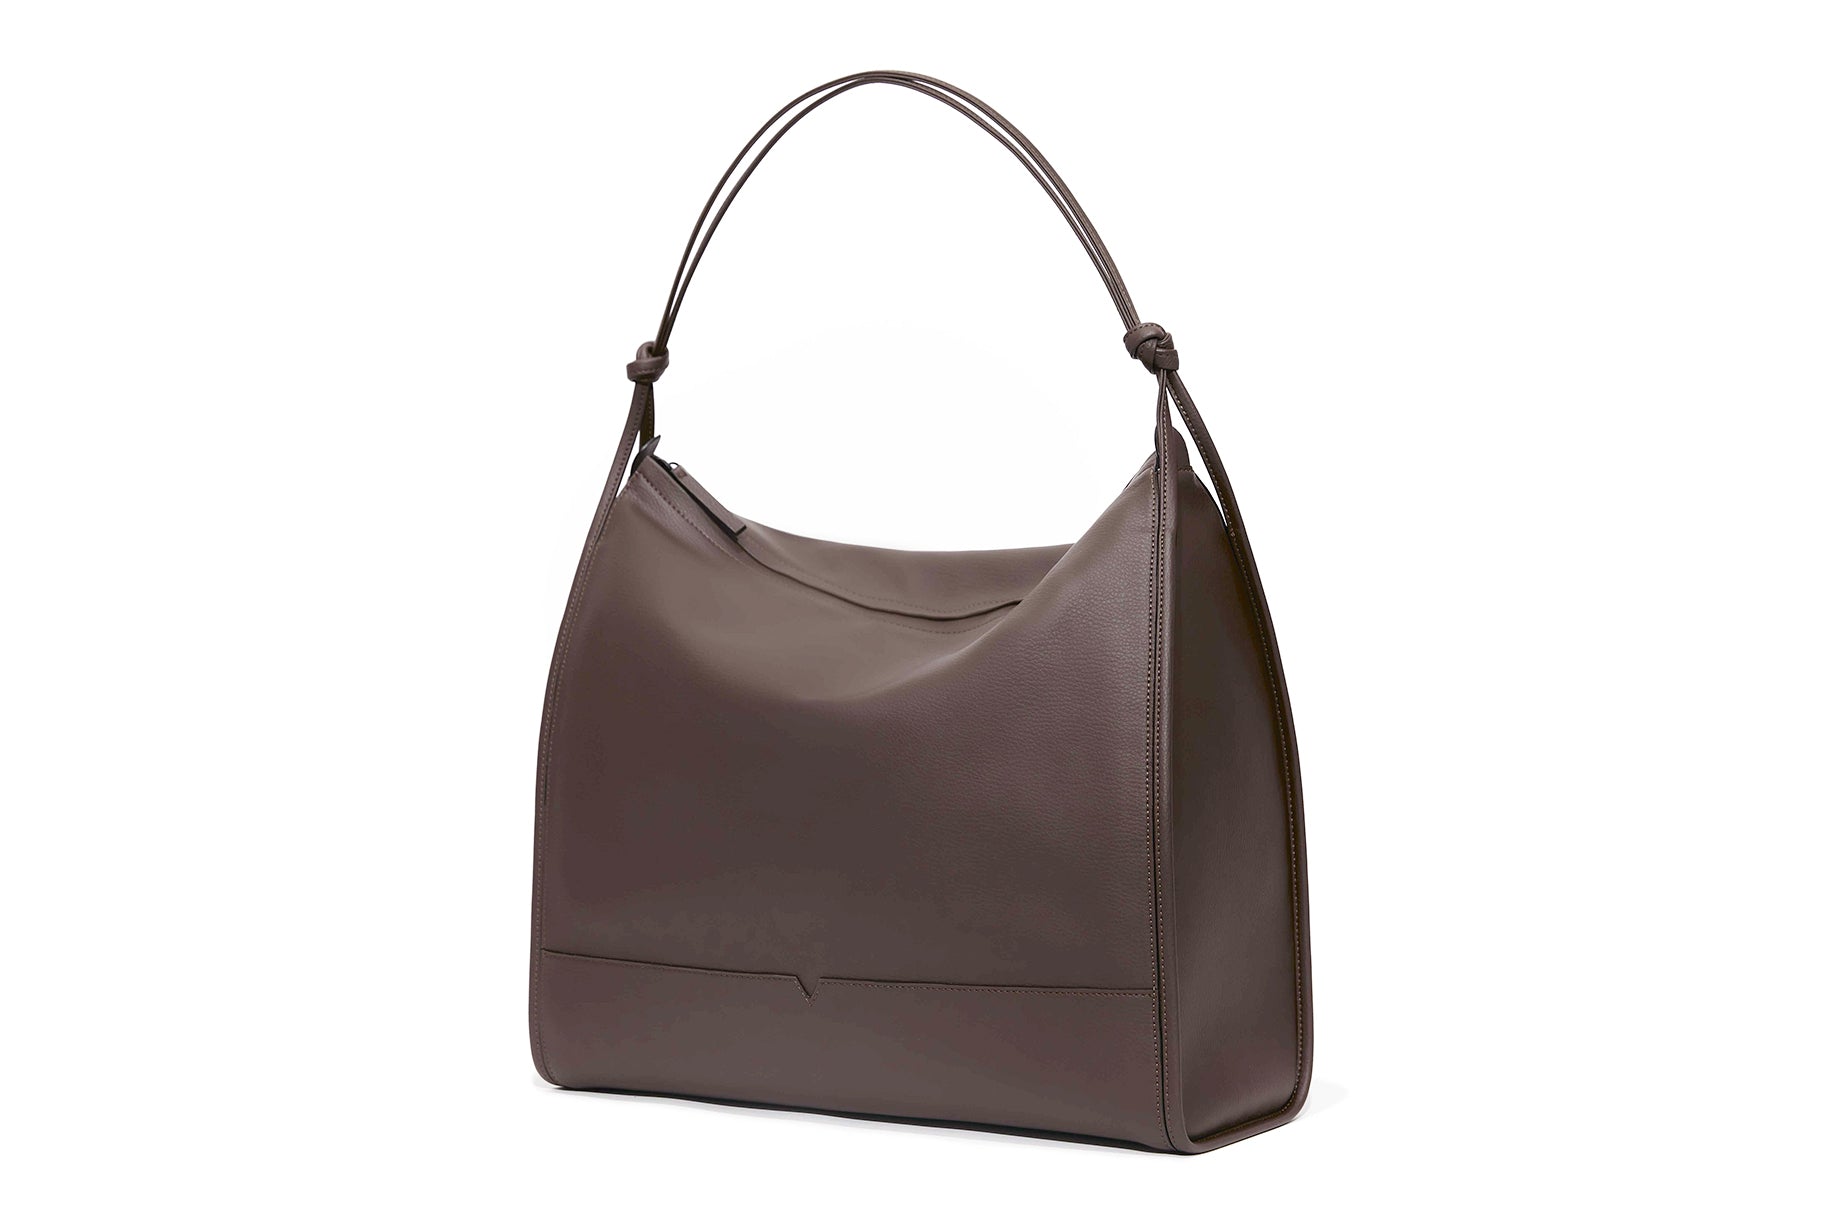 The Shoulder Bag in Banbū Leather in Taupe image 4